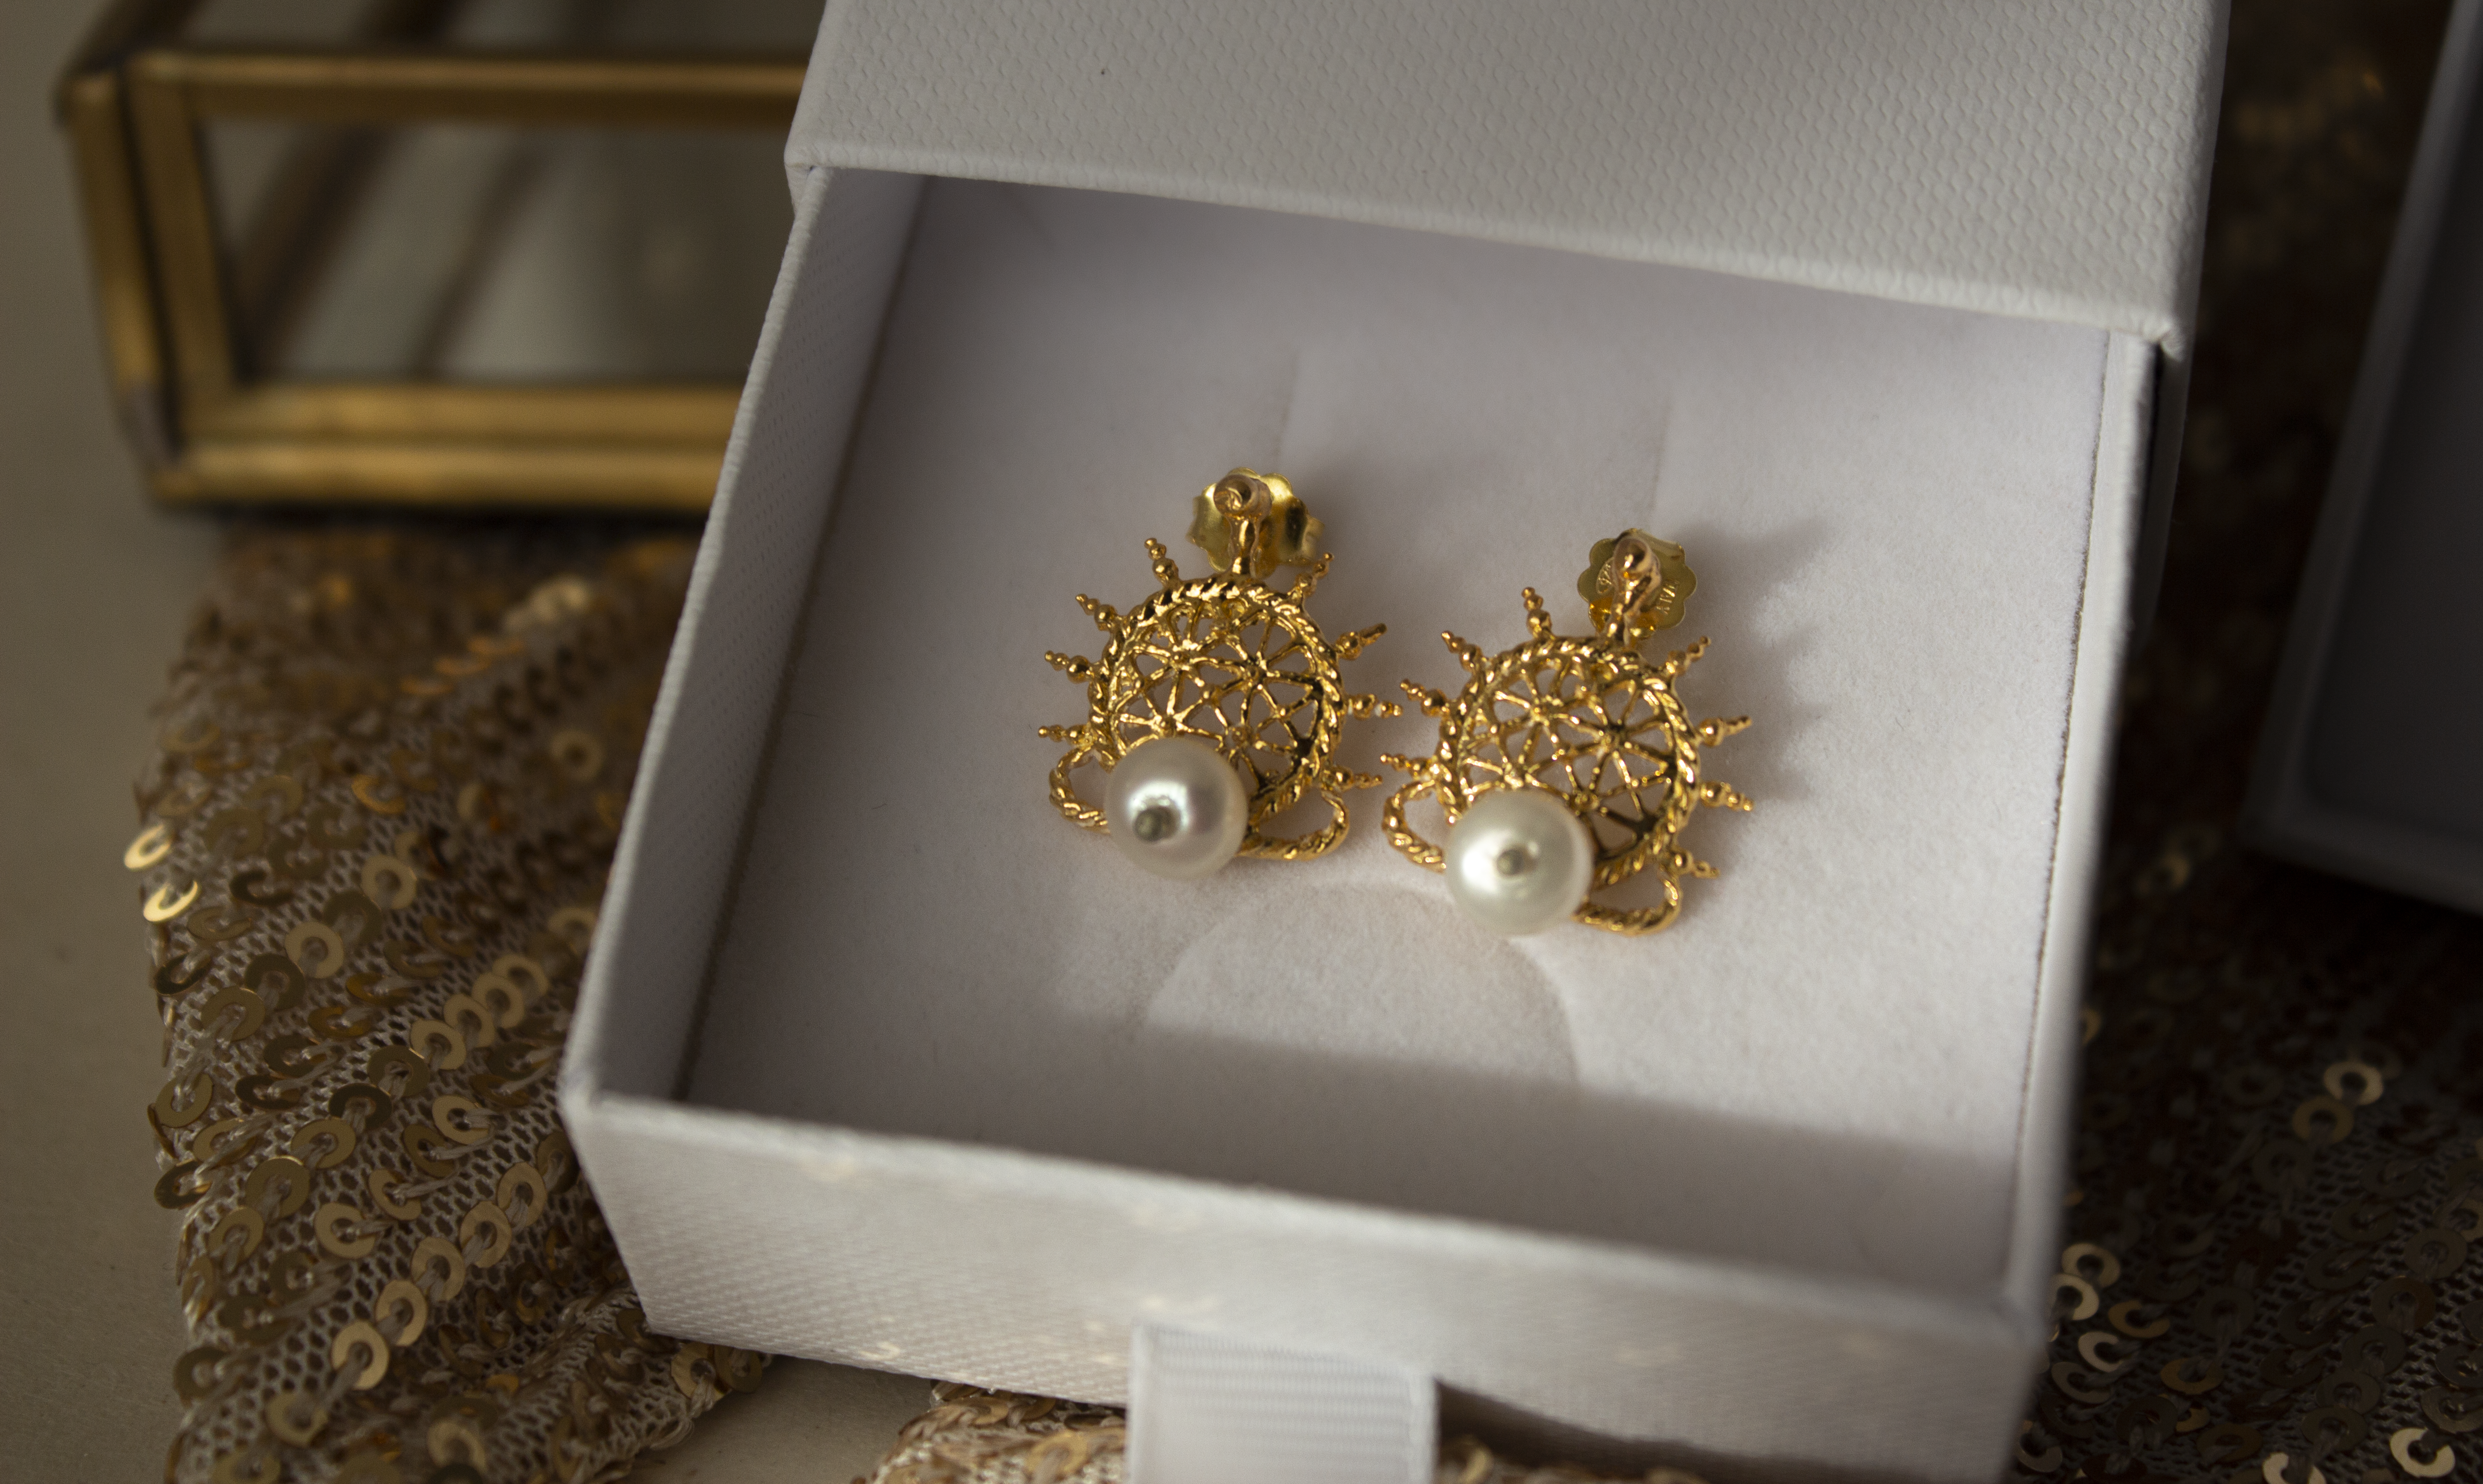 Gold earrings in small, simple lightweight designs